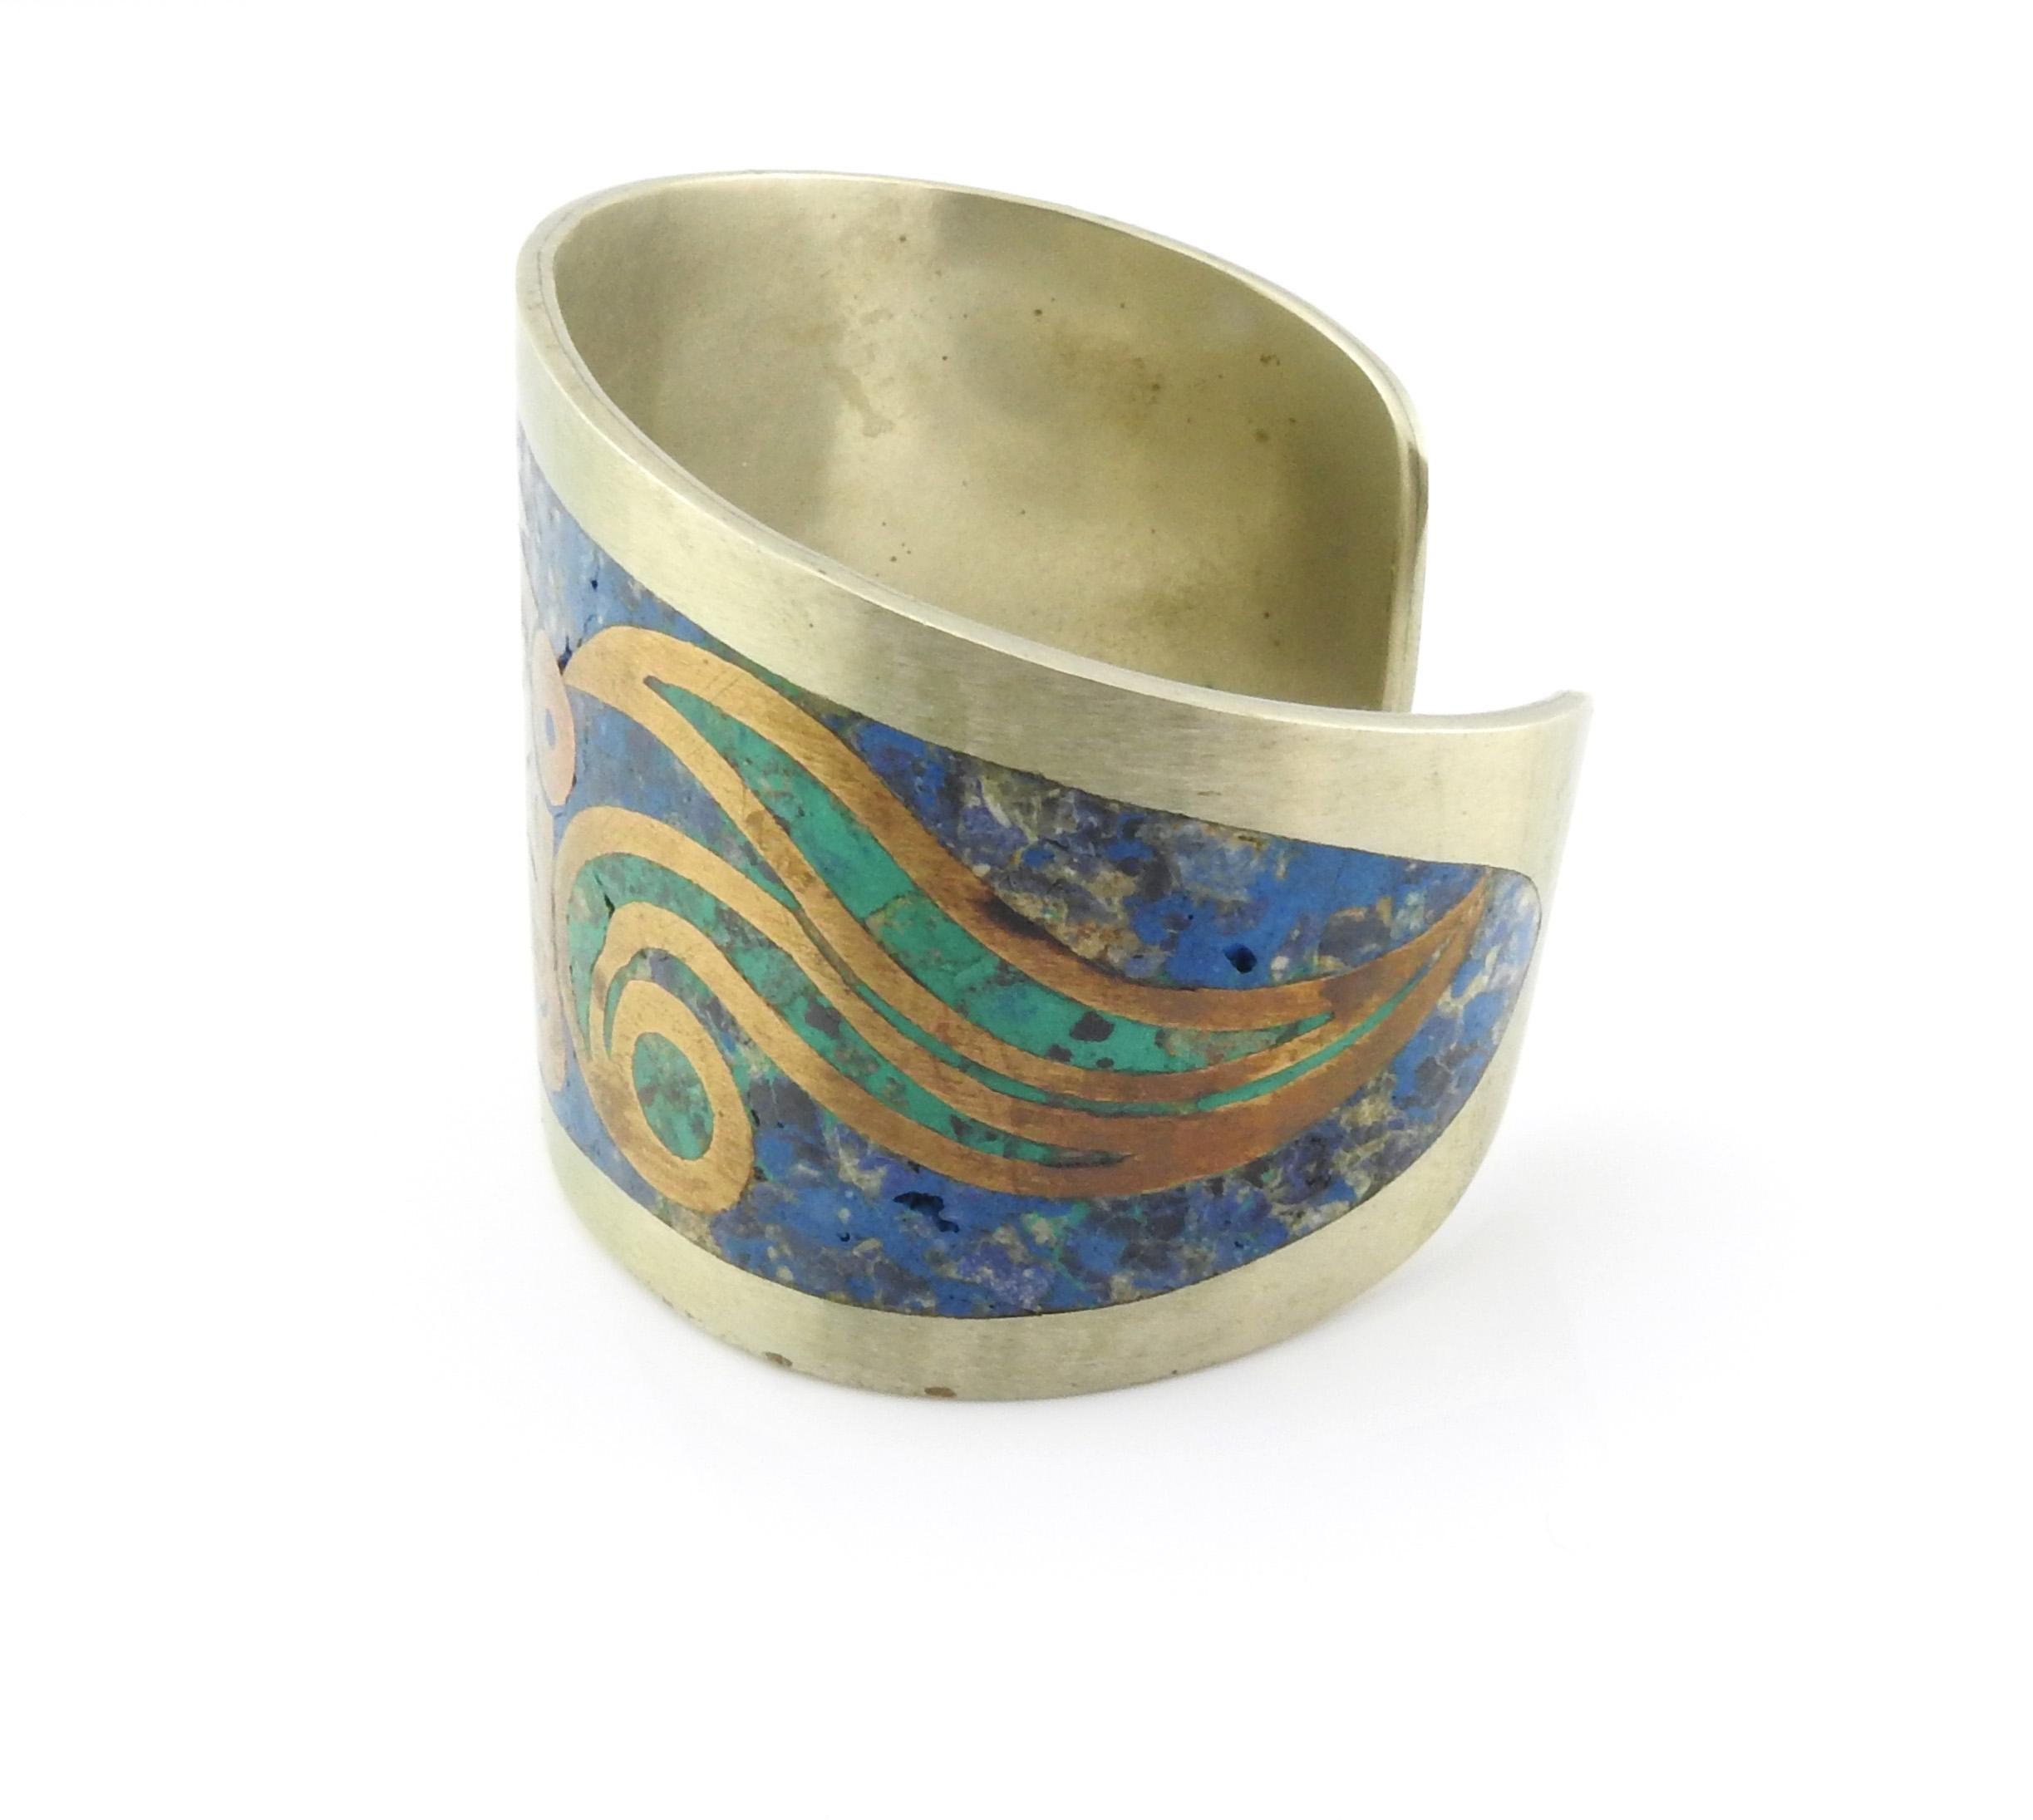 Taxco Mexico Alpaca  brass turquoise & lapis lazuli inlay cuff bracelet. Brass design on top of inlay features what looks like a god/deity face with swirls.

Marking: ALPACA MEXICO TAXCO.

Measures approx. 5 1/2